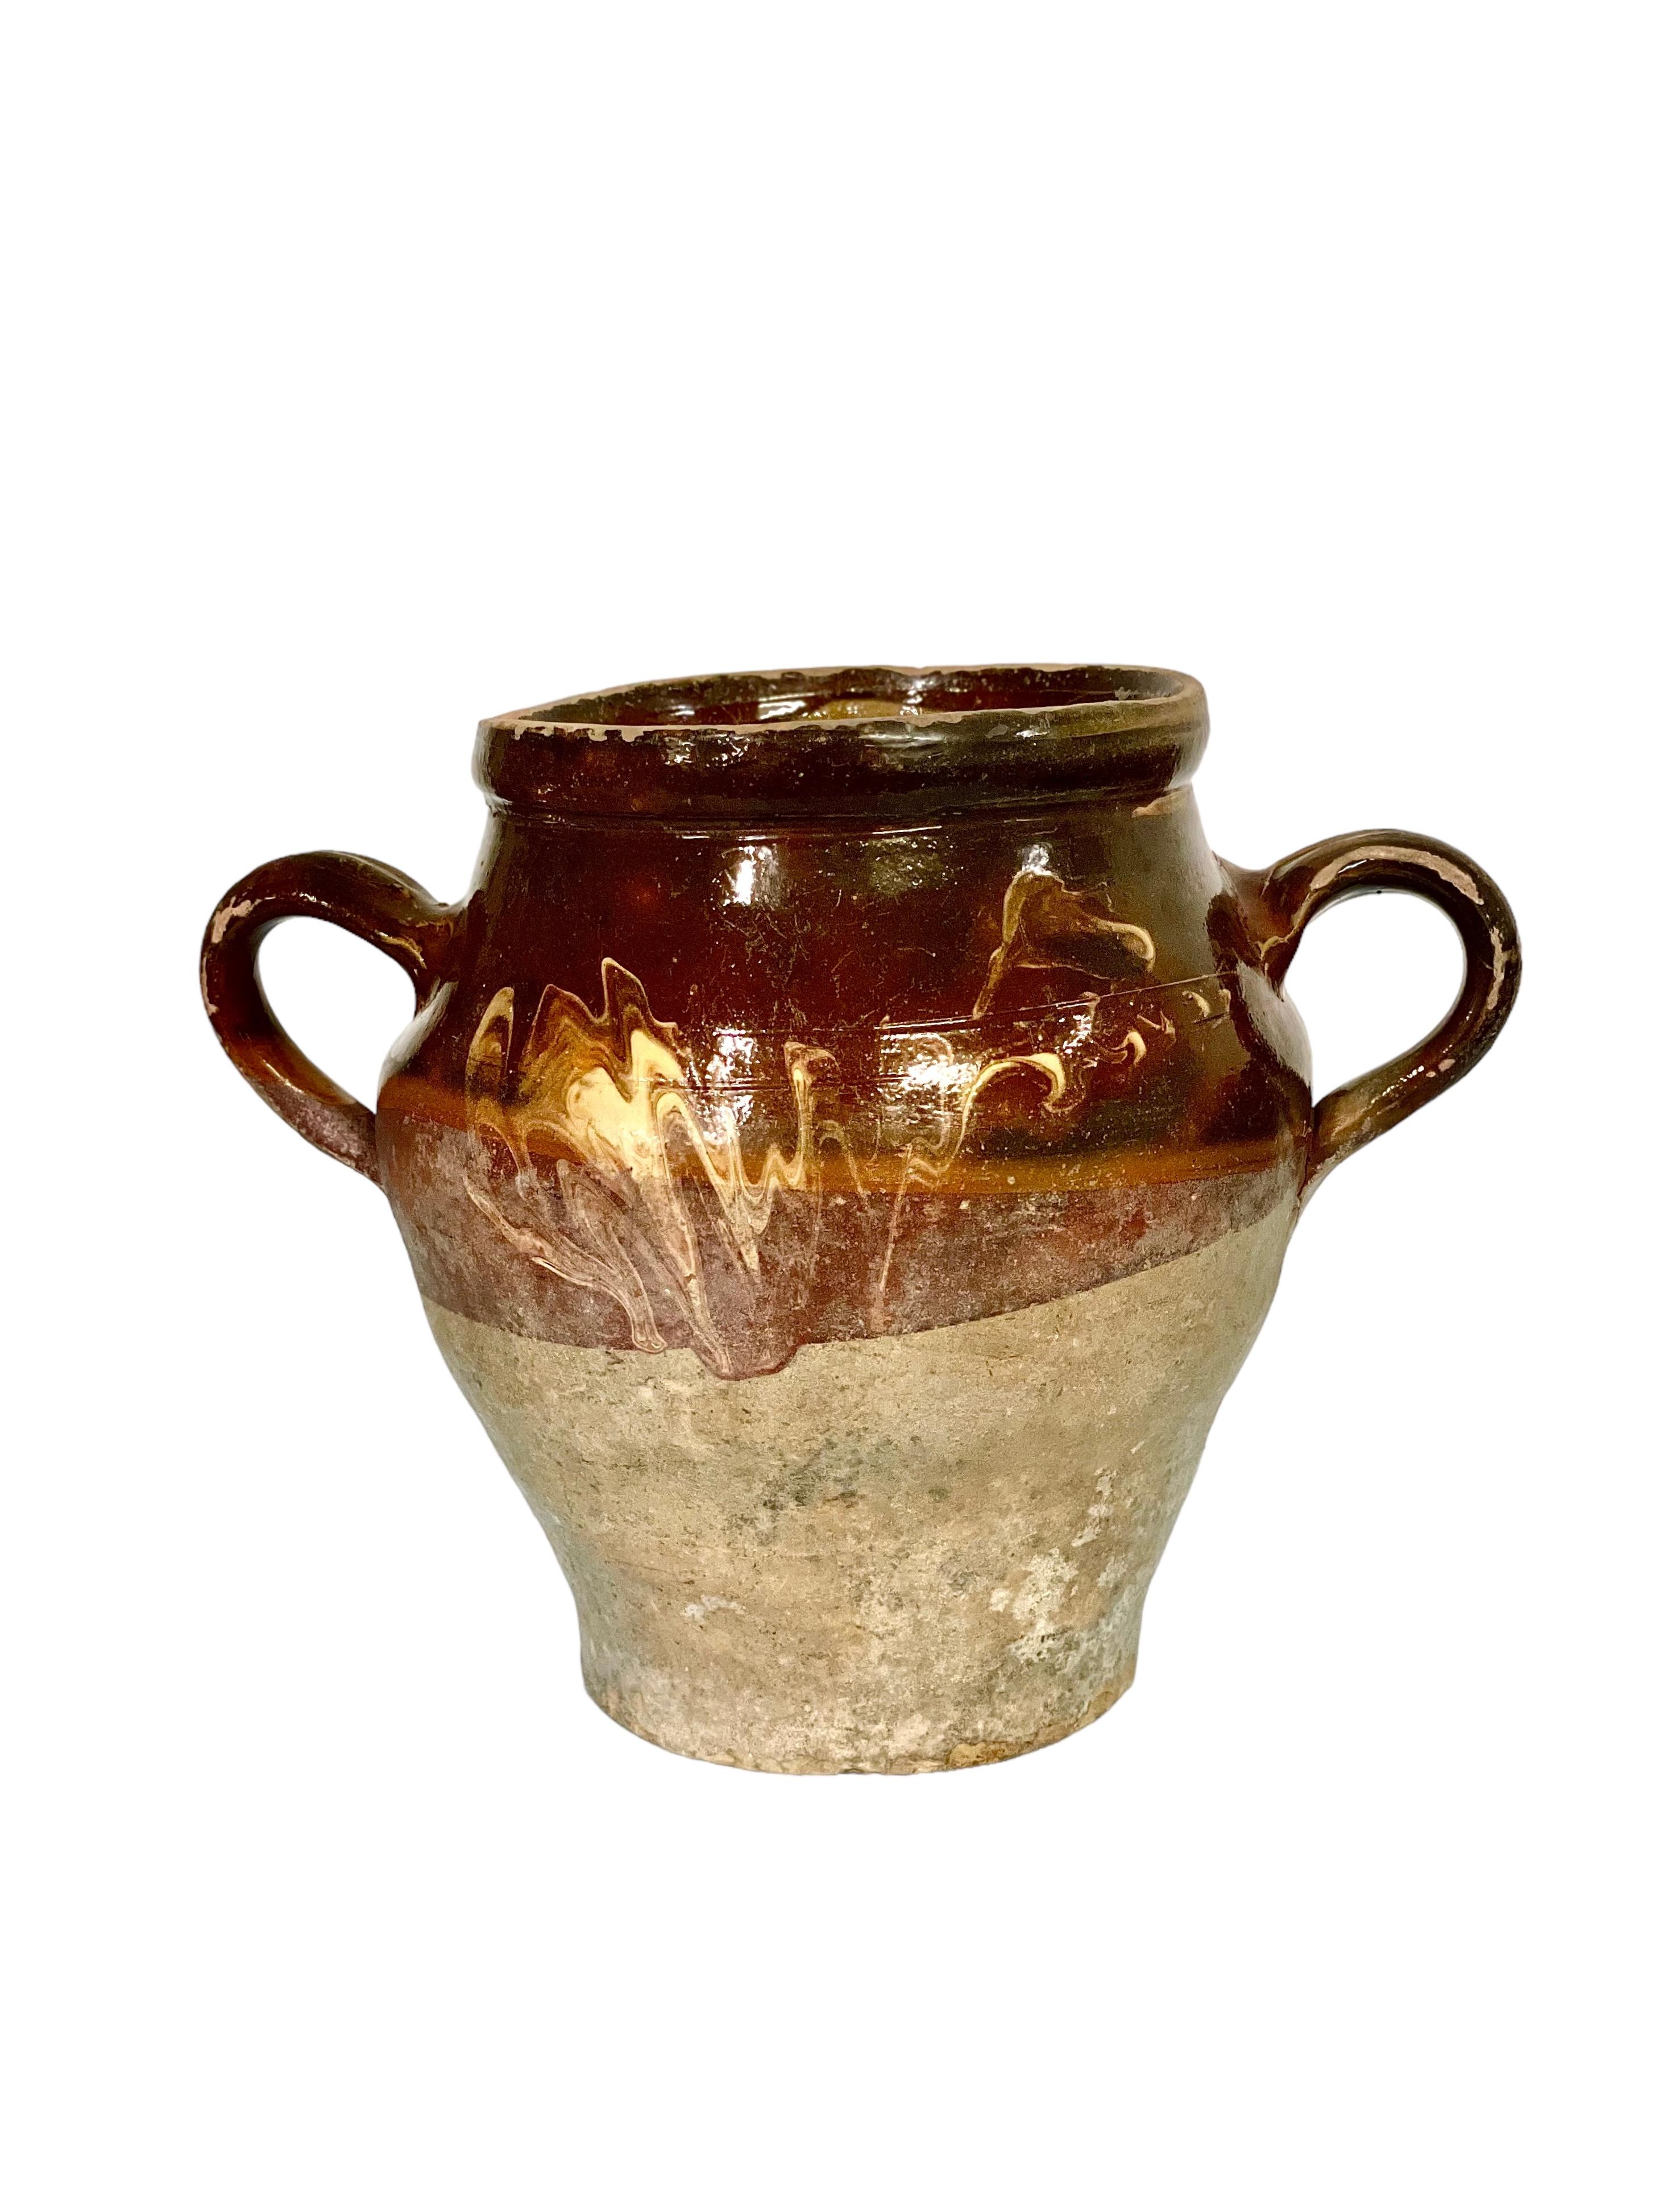 Traditional French terracotta confit pot with two side handles. Half glazed in brown with a 'flame' design, this vessel would have been used to conserve food – mainly meats in fat – before the invention of refrigeration. It's unglazed portion